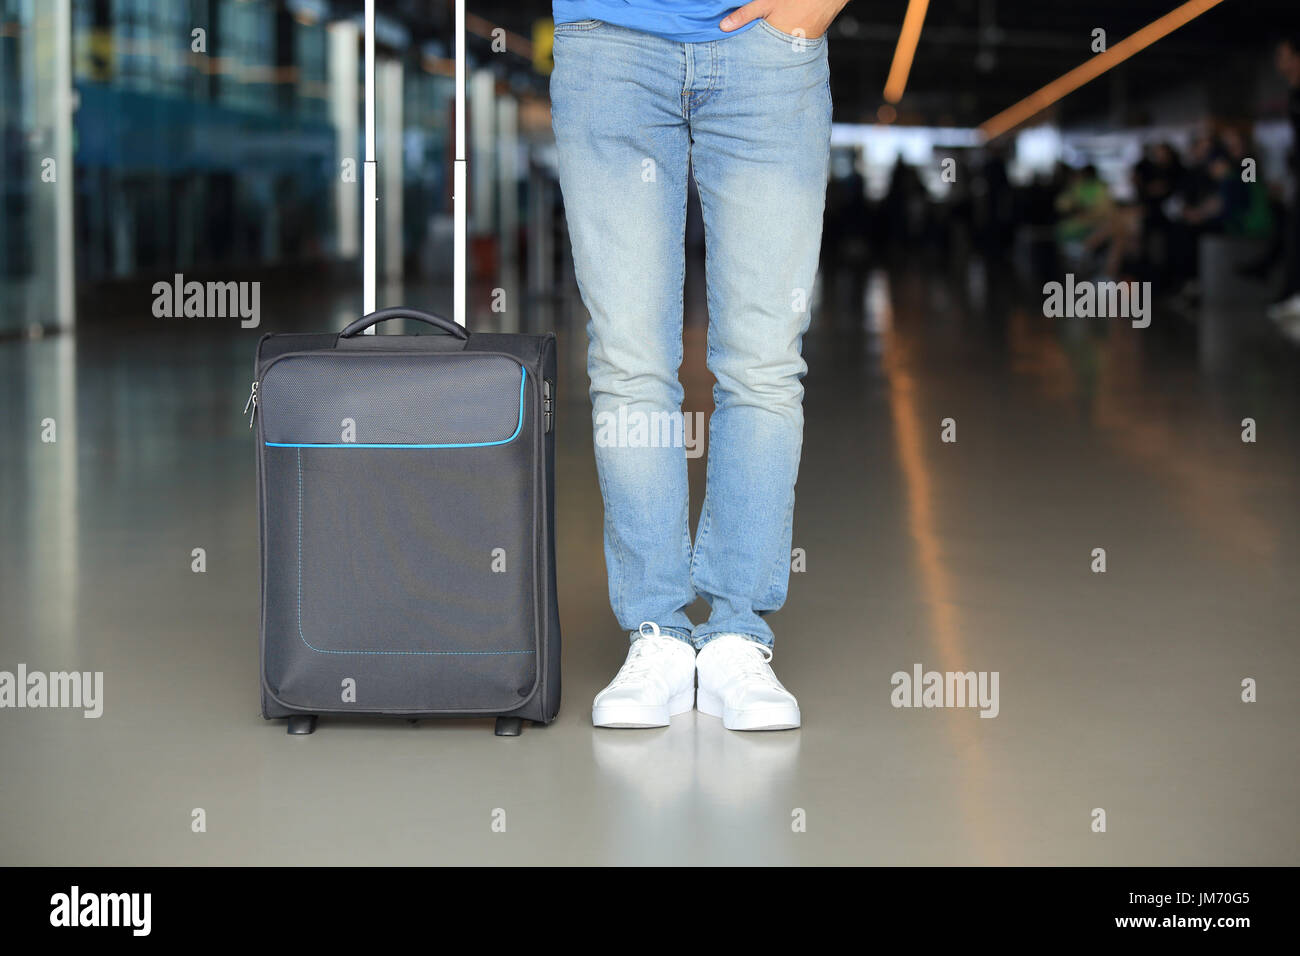 Man in blue jeans with suitcase in airport. Passenger traffic theme. Stock Photo